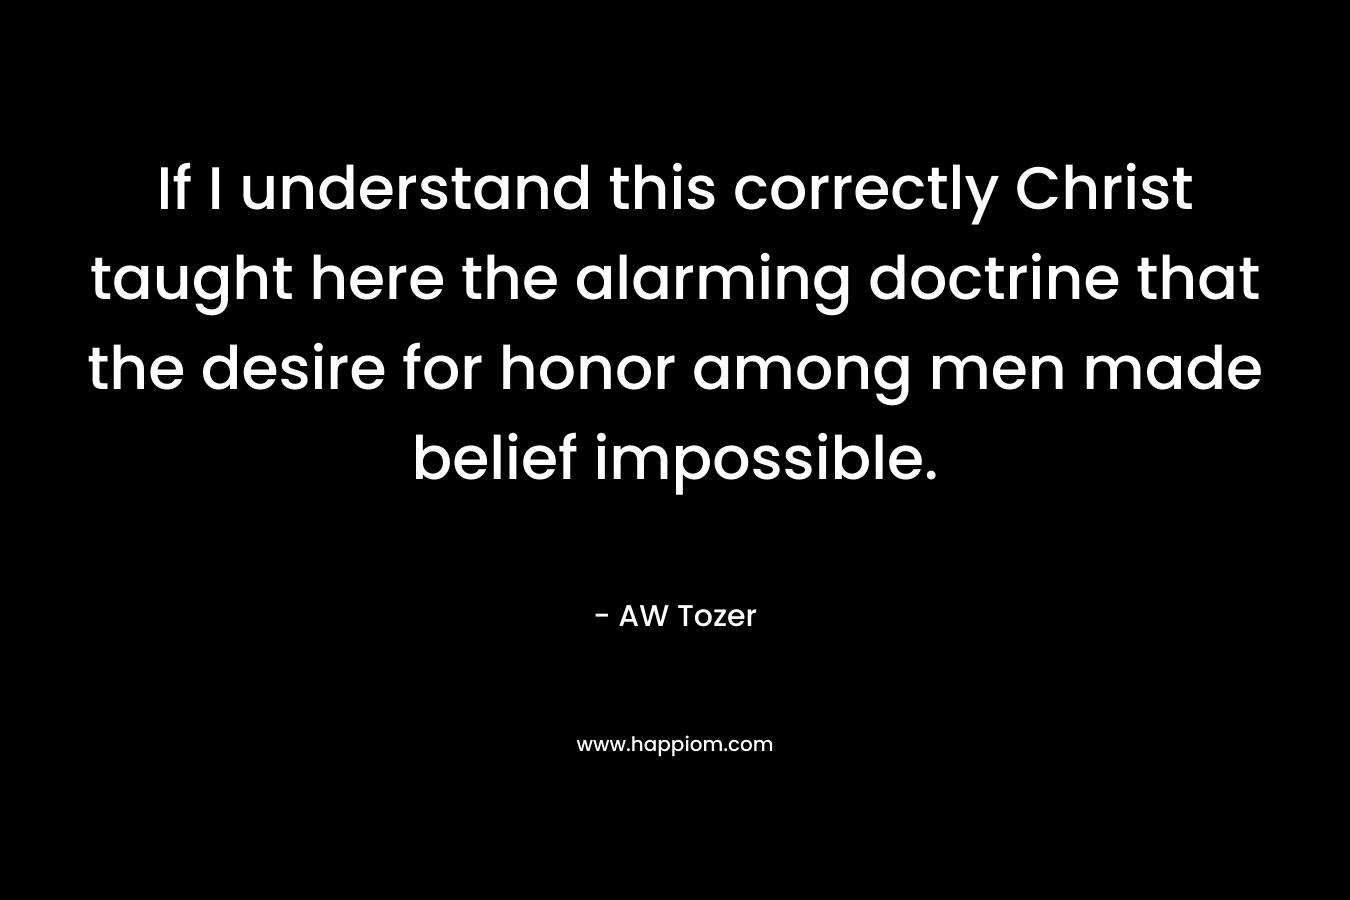 If I understand this correctly Christ taught here the alarming doctrine that the desire for honor among men made belief impossible.